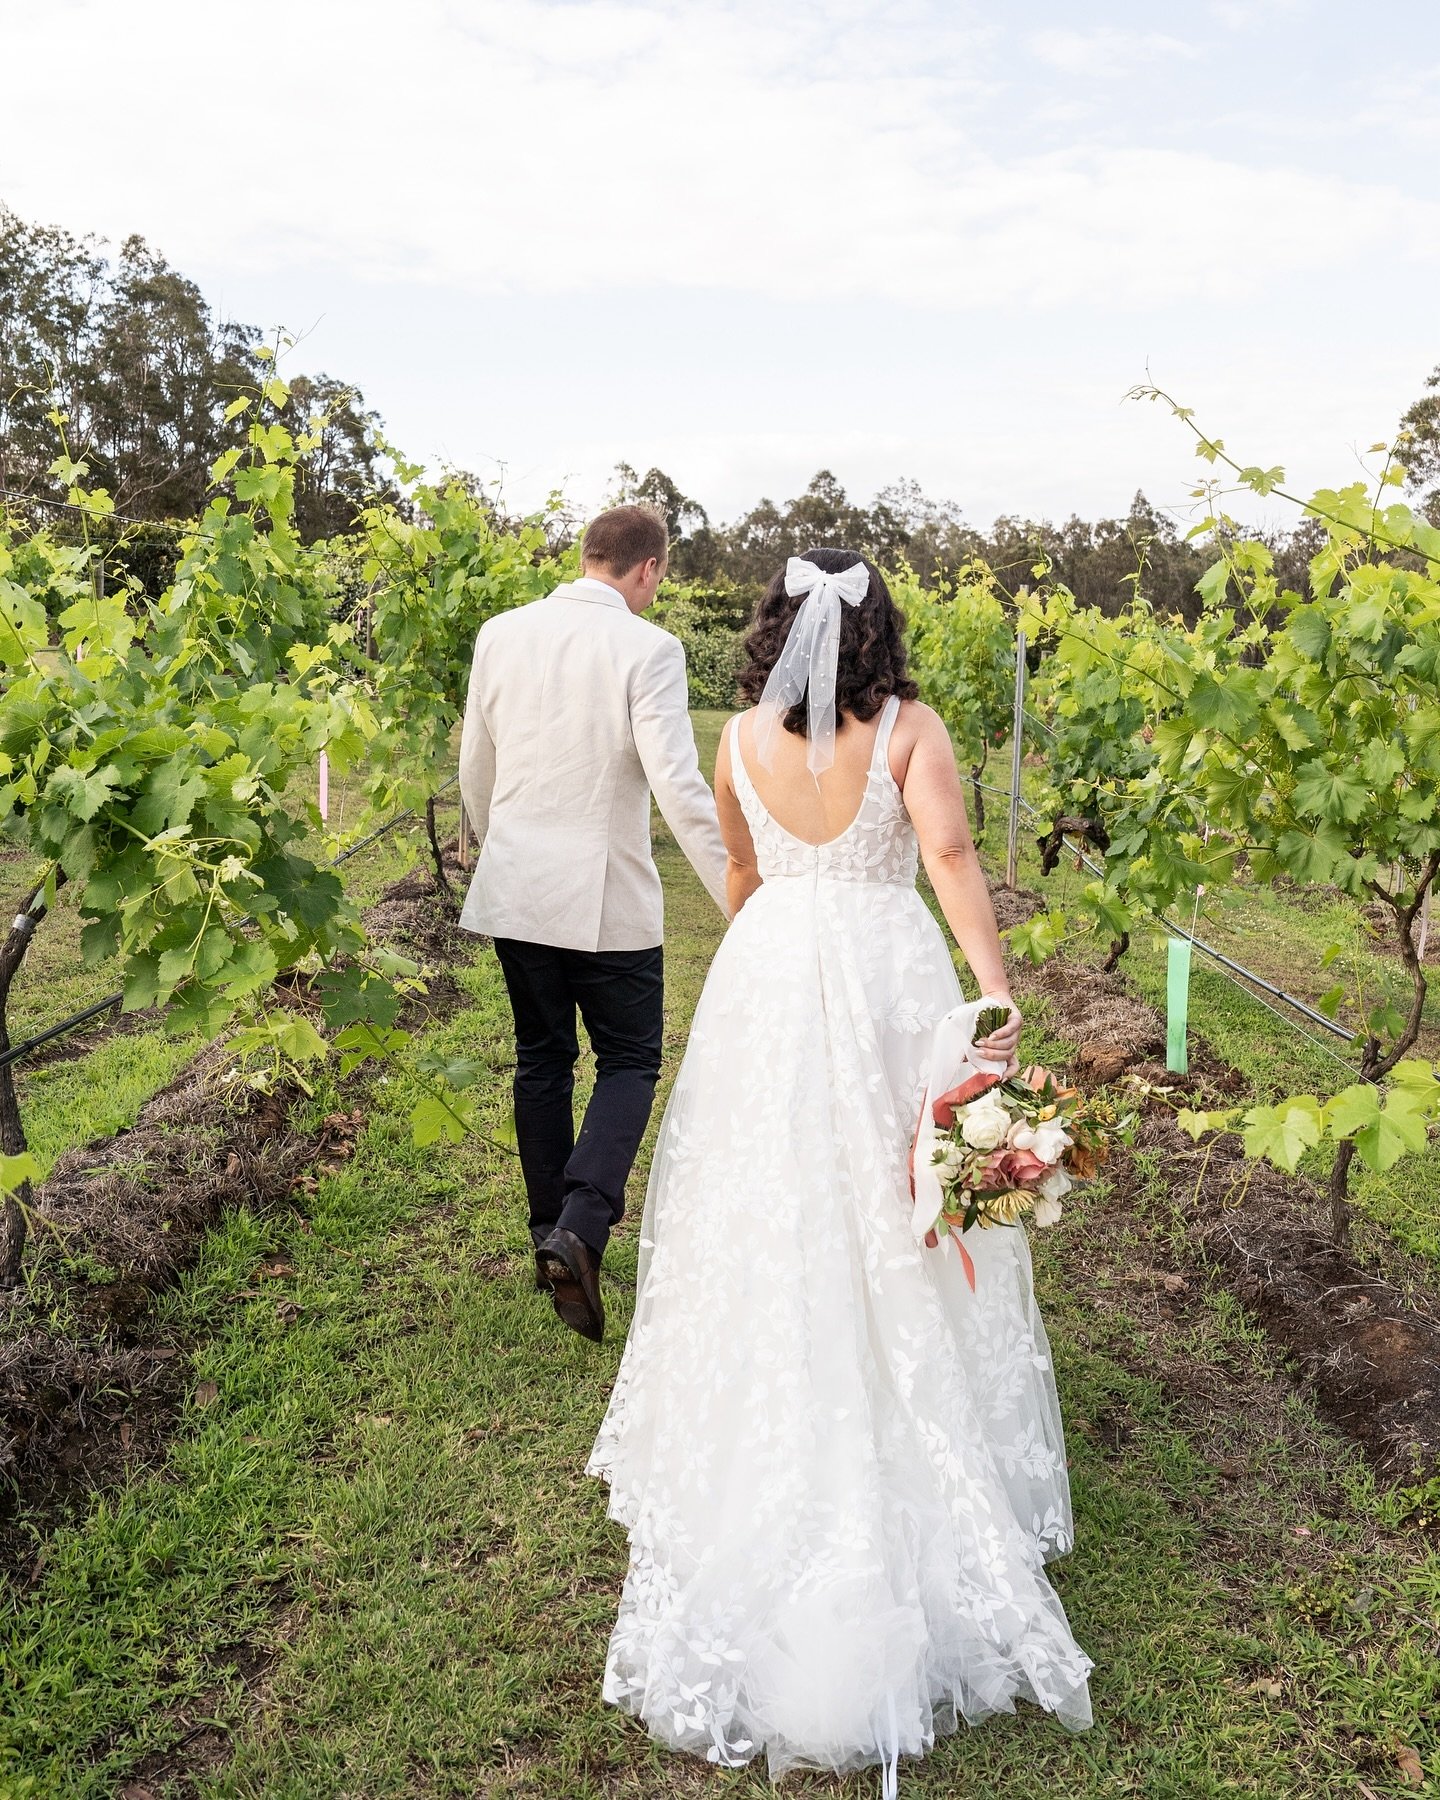 Chloe and Hayden getting lost in the vines on their dreamy spring wedding day 🤍

Styling, planning &amp; coordination @_isntitlovelyevents 
Catering @yellowbillyrestaurant 
Photography @bedroom.studio_ 
Celebrant @sweetbasil_celebrant 
Florals @noah